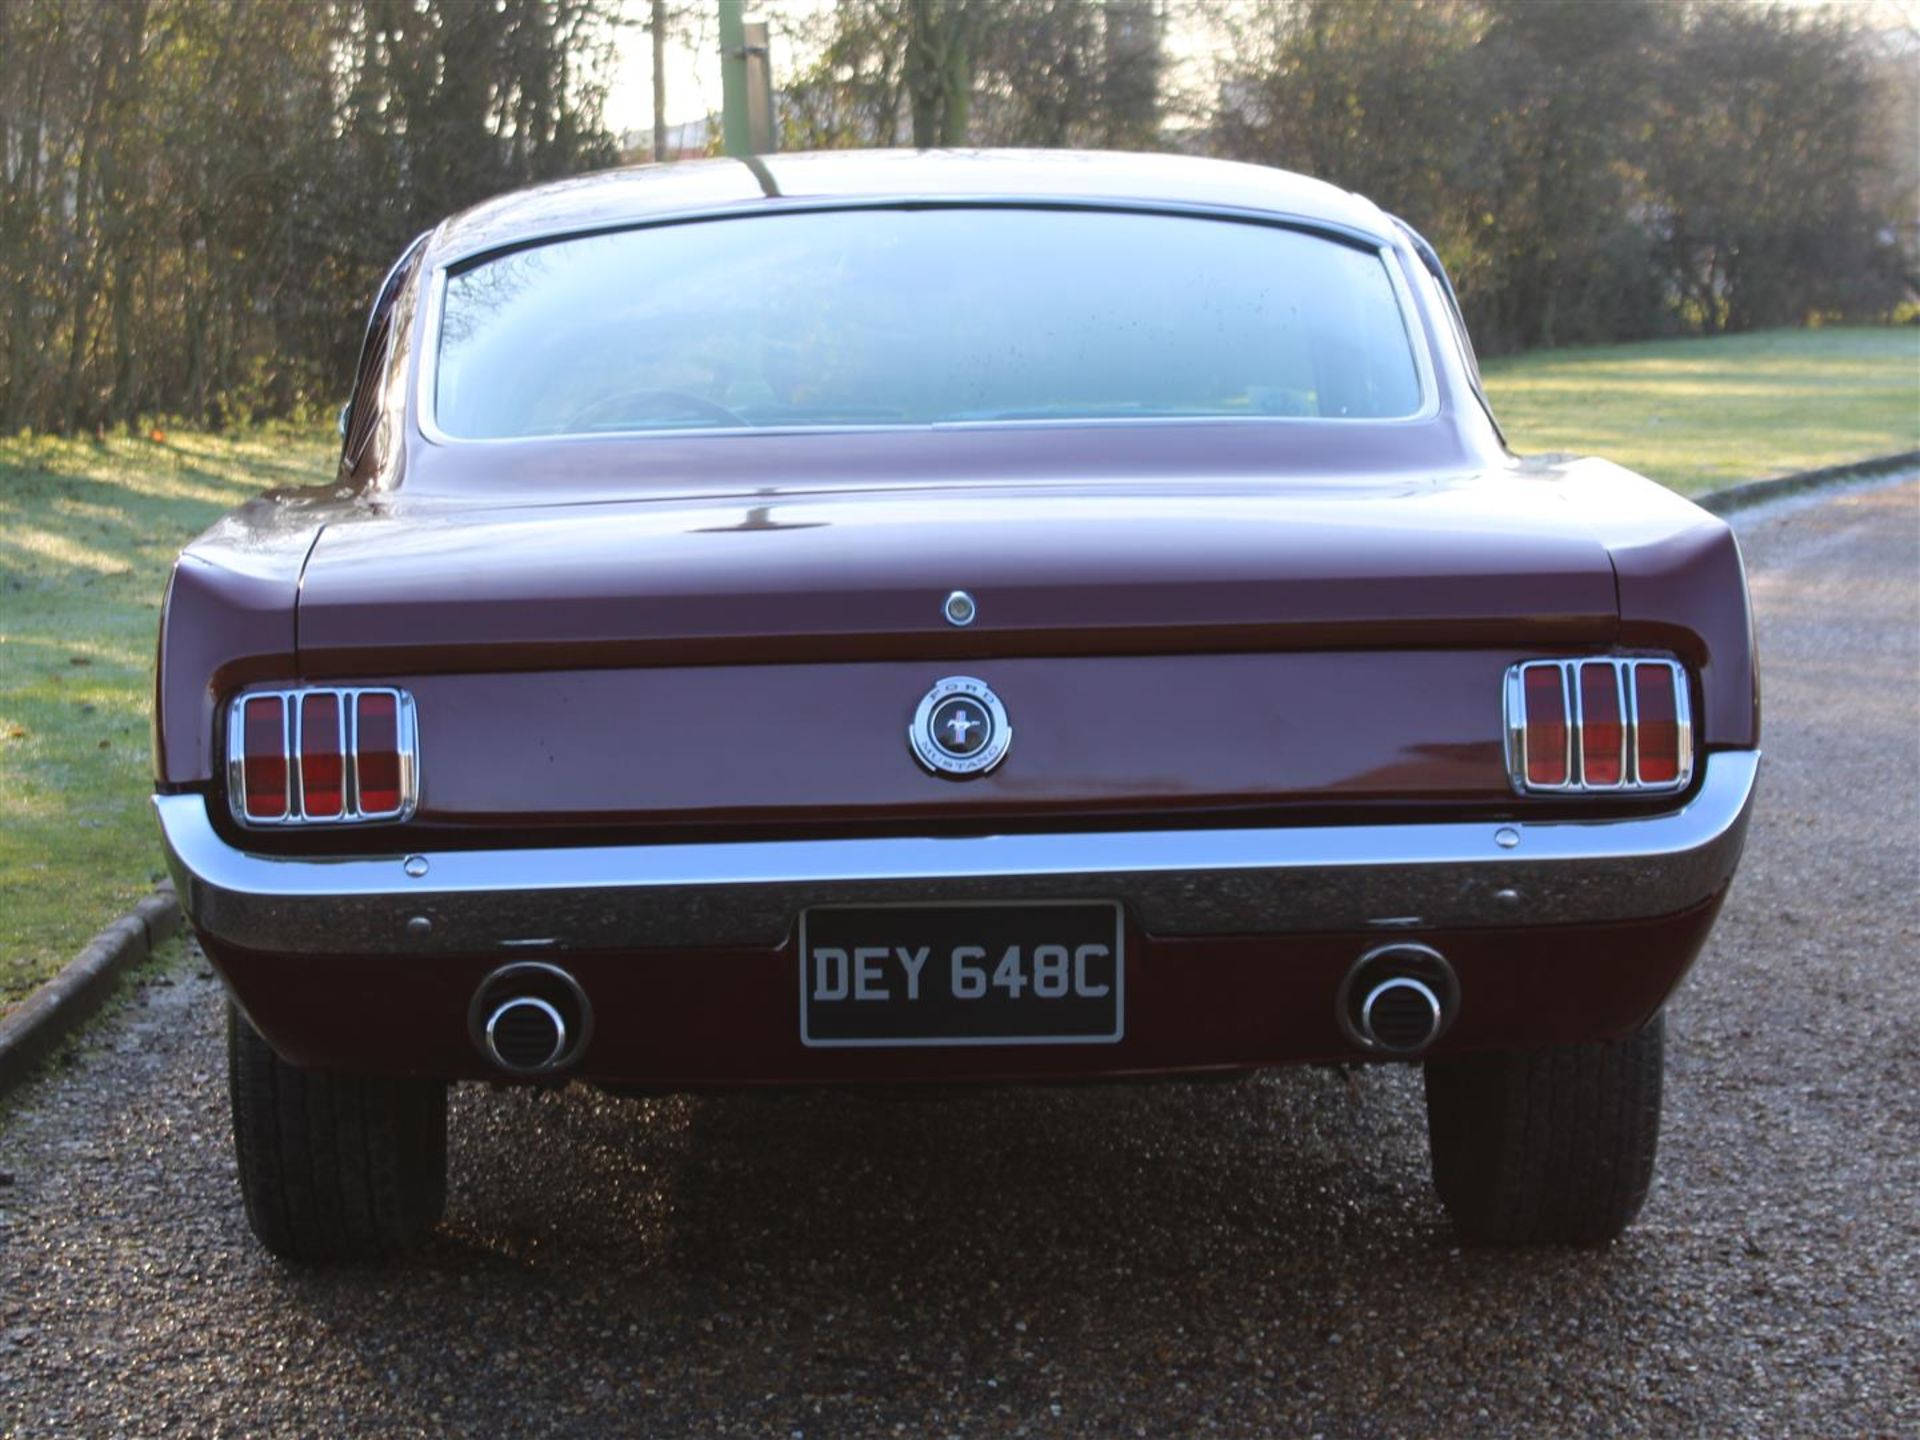 1965 Ford Mustang 5.0 V8 Fastback Auto LHD - Image 5 of 21